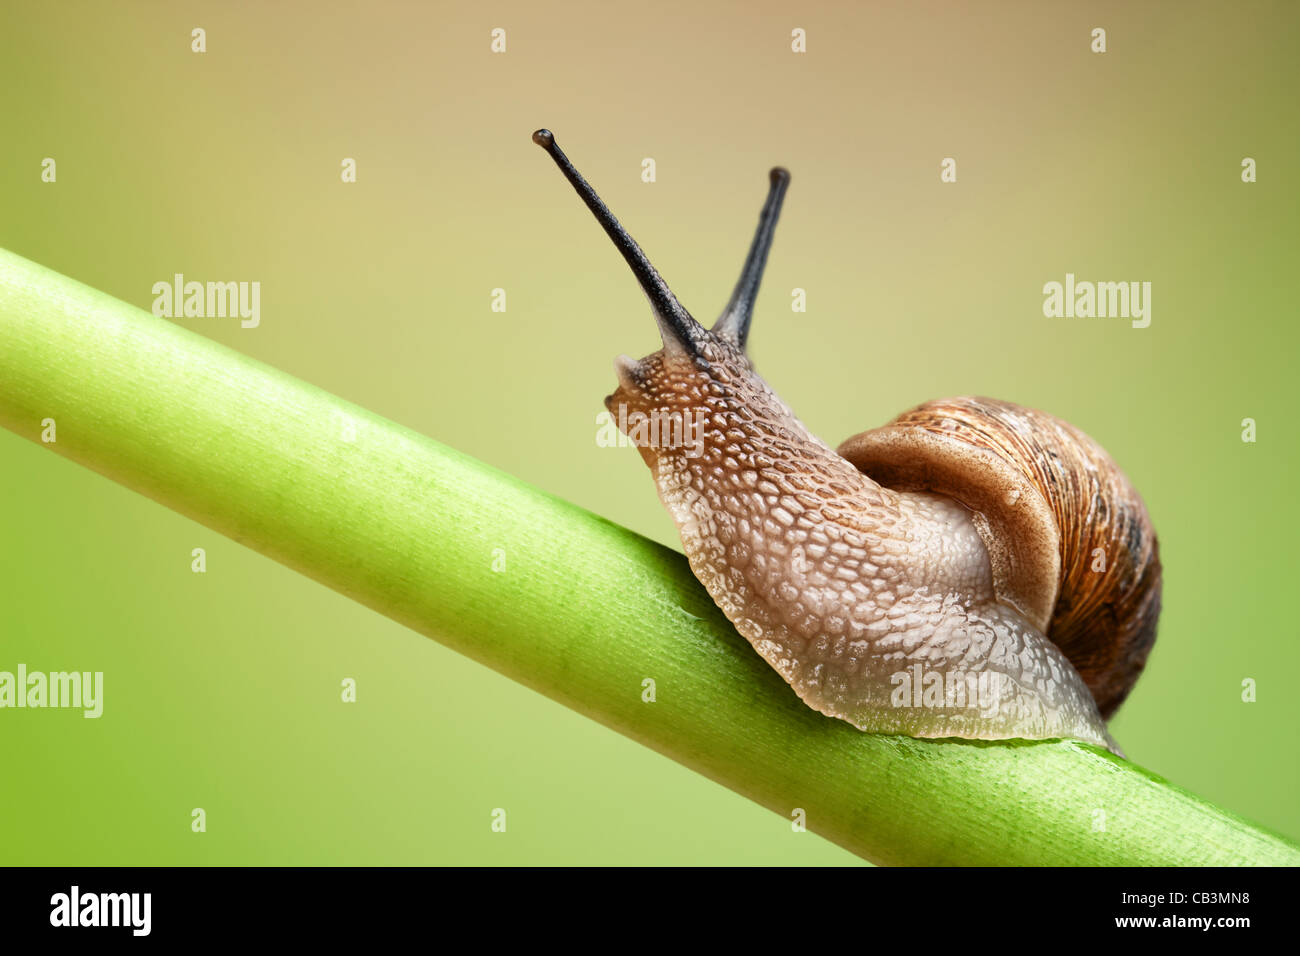 Common garden snail crawling on green stem of plant Stock Photo